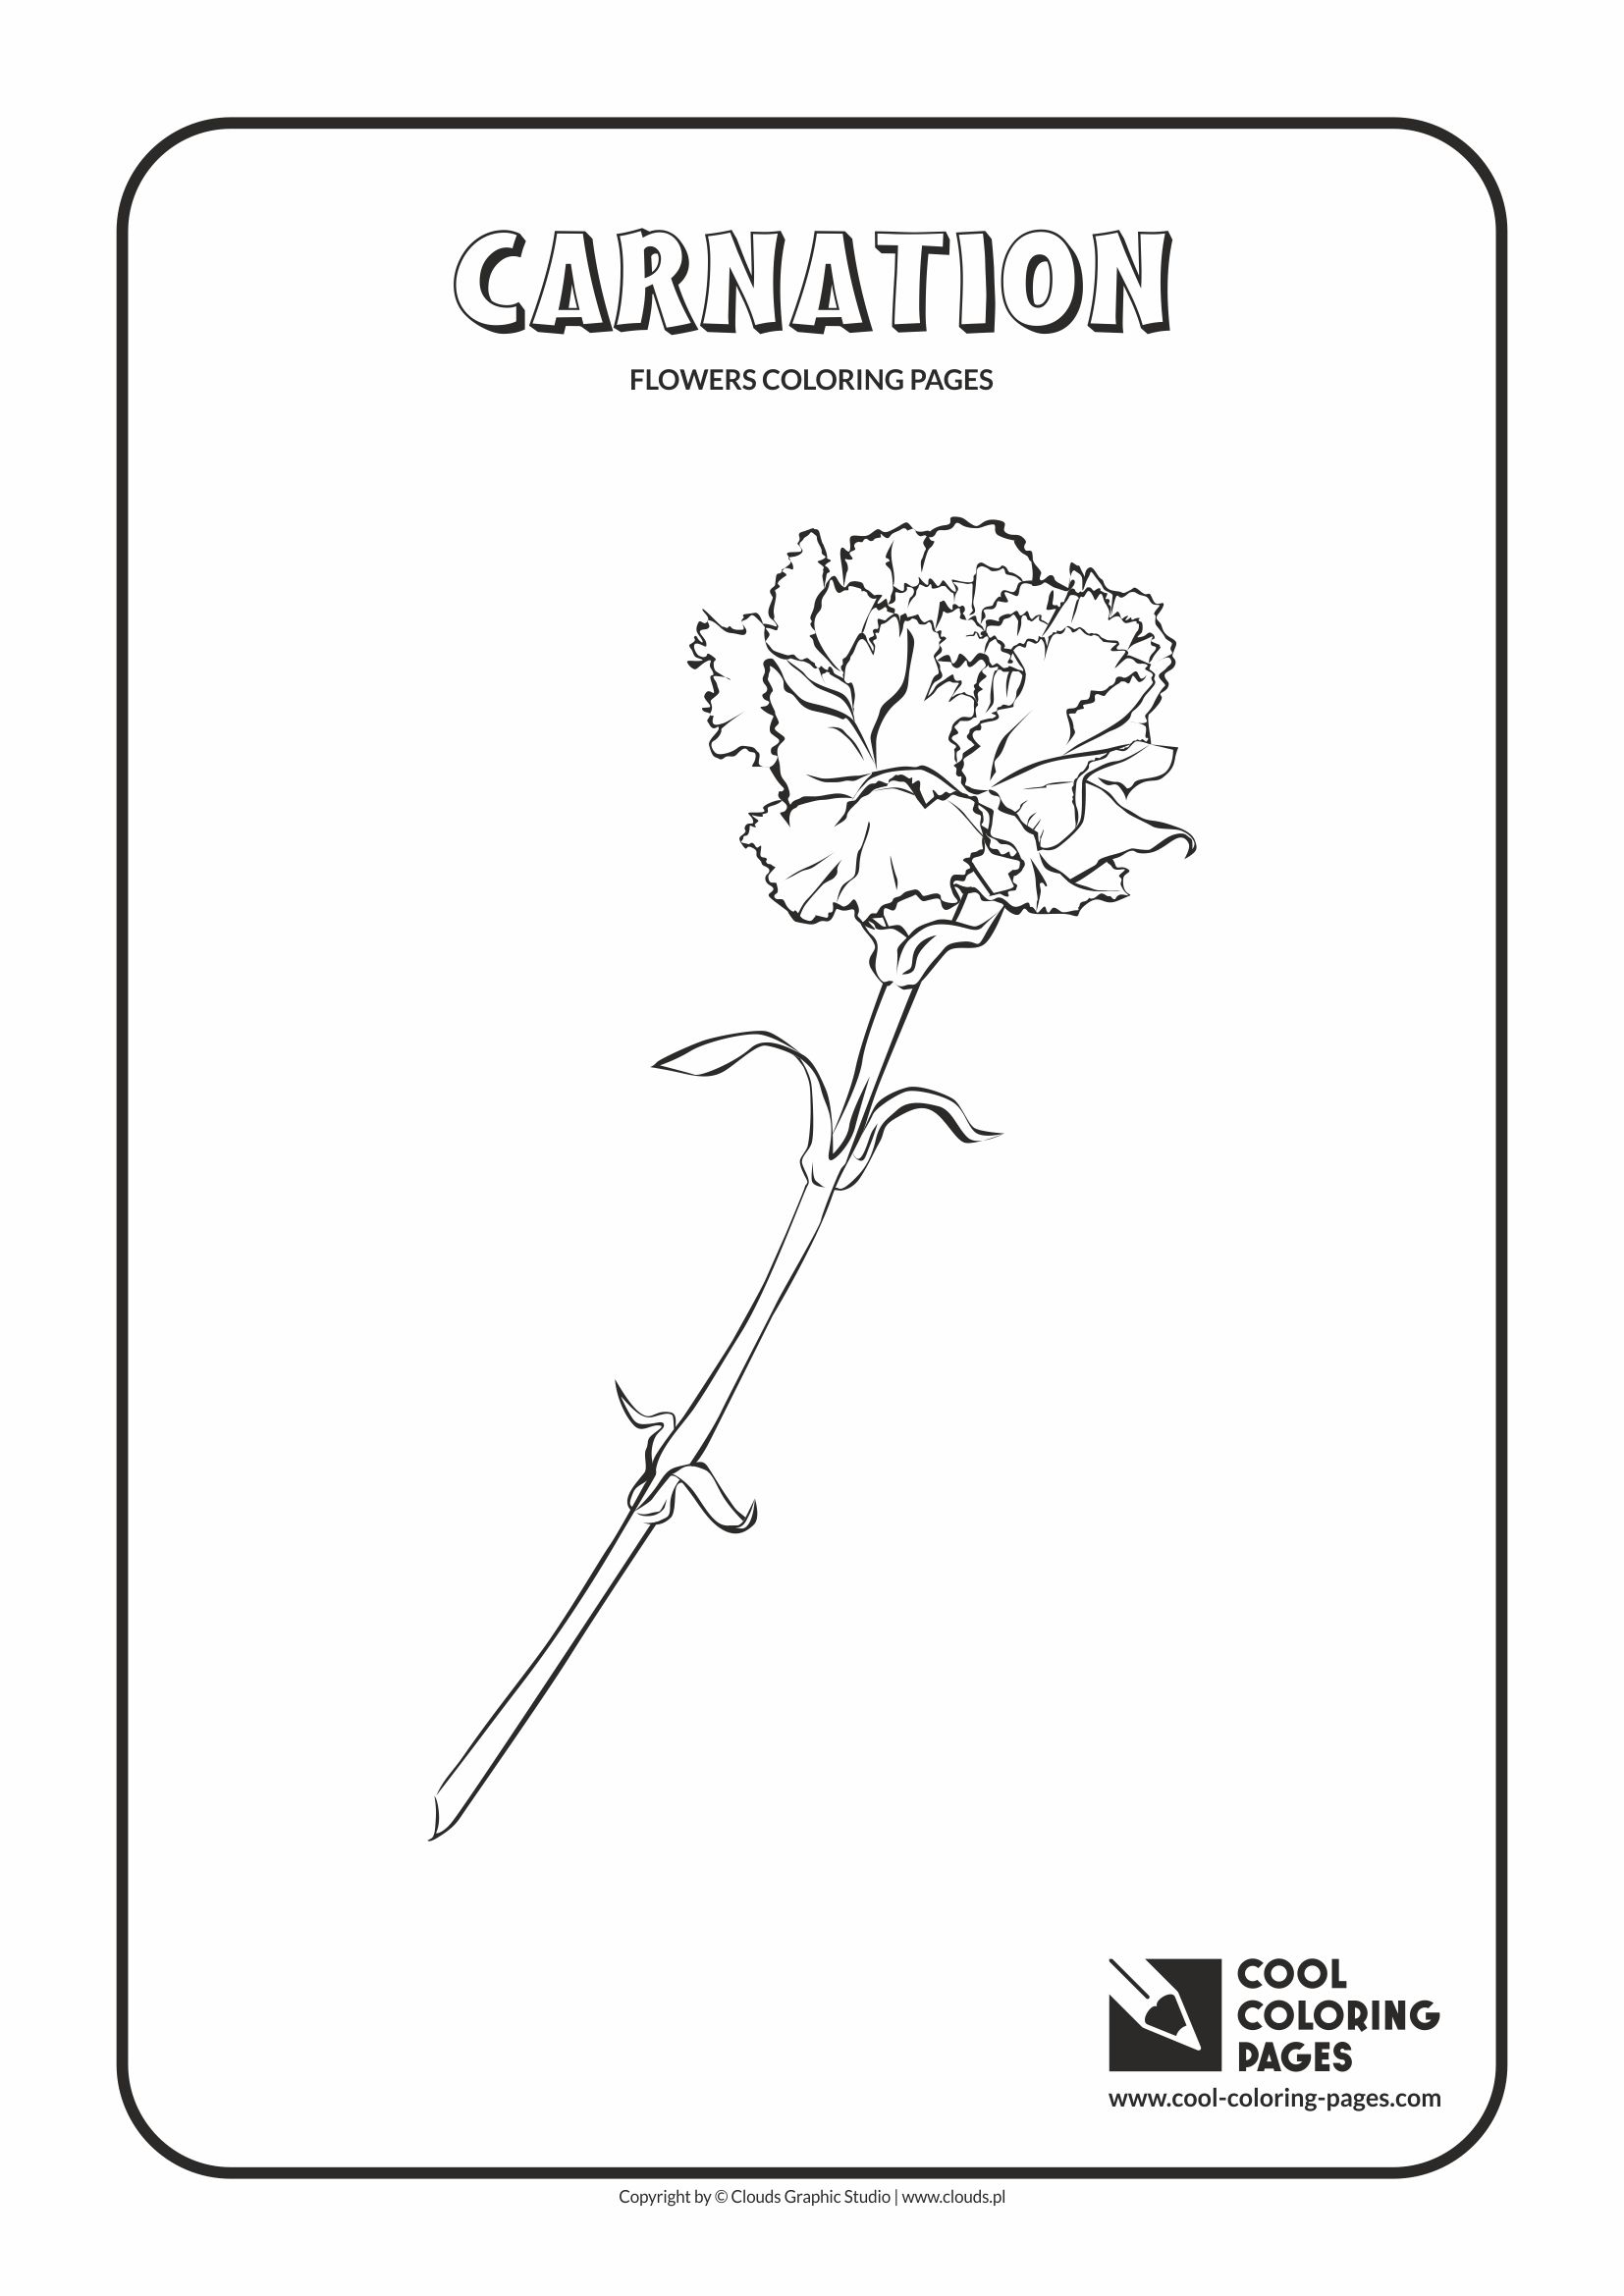 Cool Coloring Pages - Plants / Carnation / Coloring page with carnation